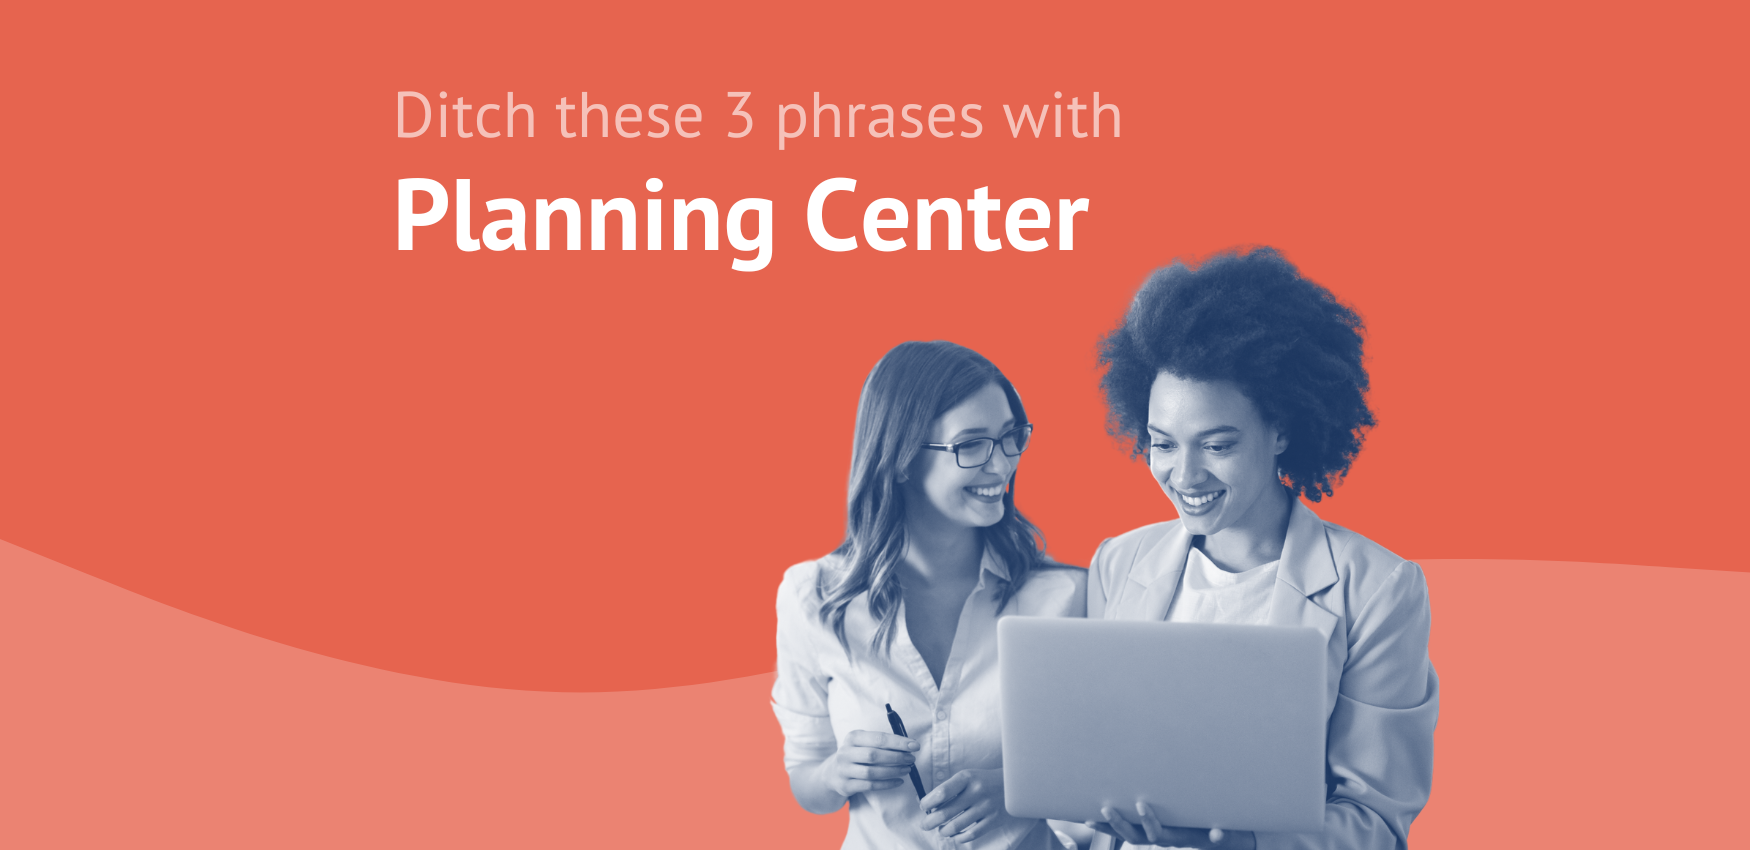 3 Phrases You Can Ditch With This Convenient Online At-Need Planning Tool For Families